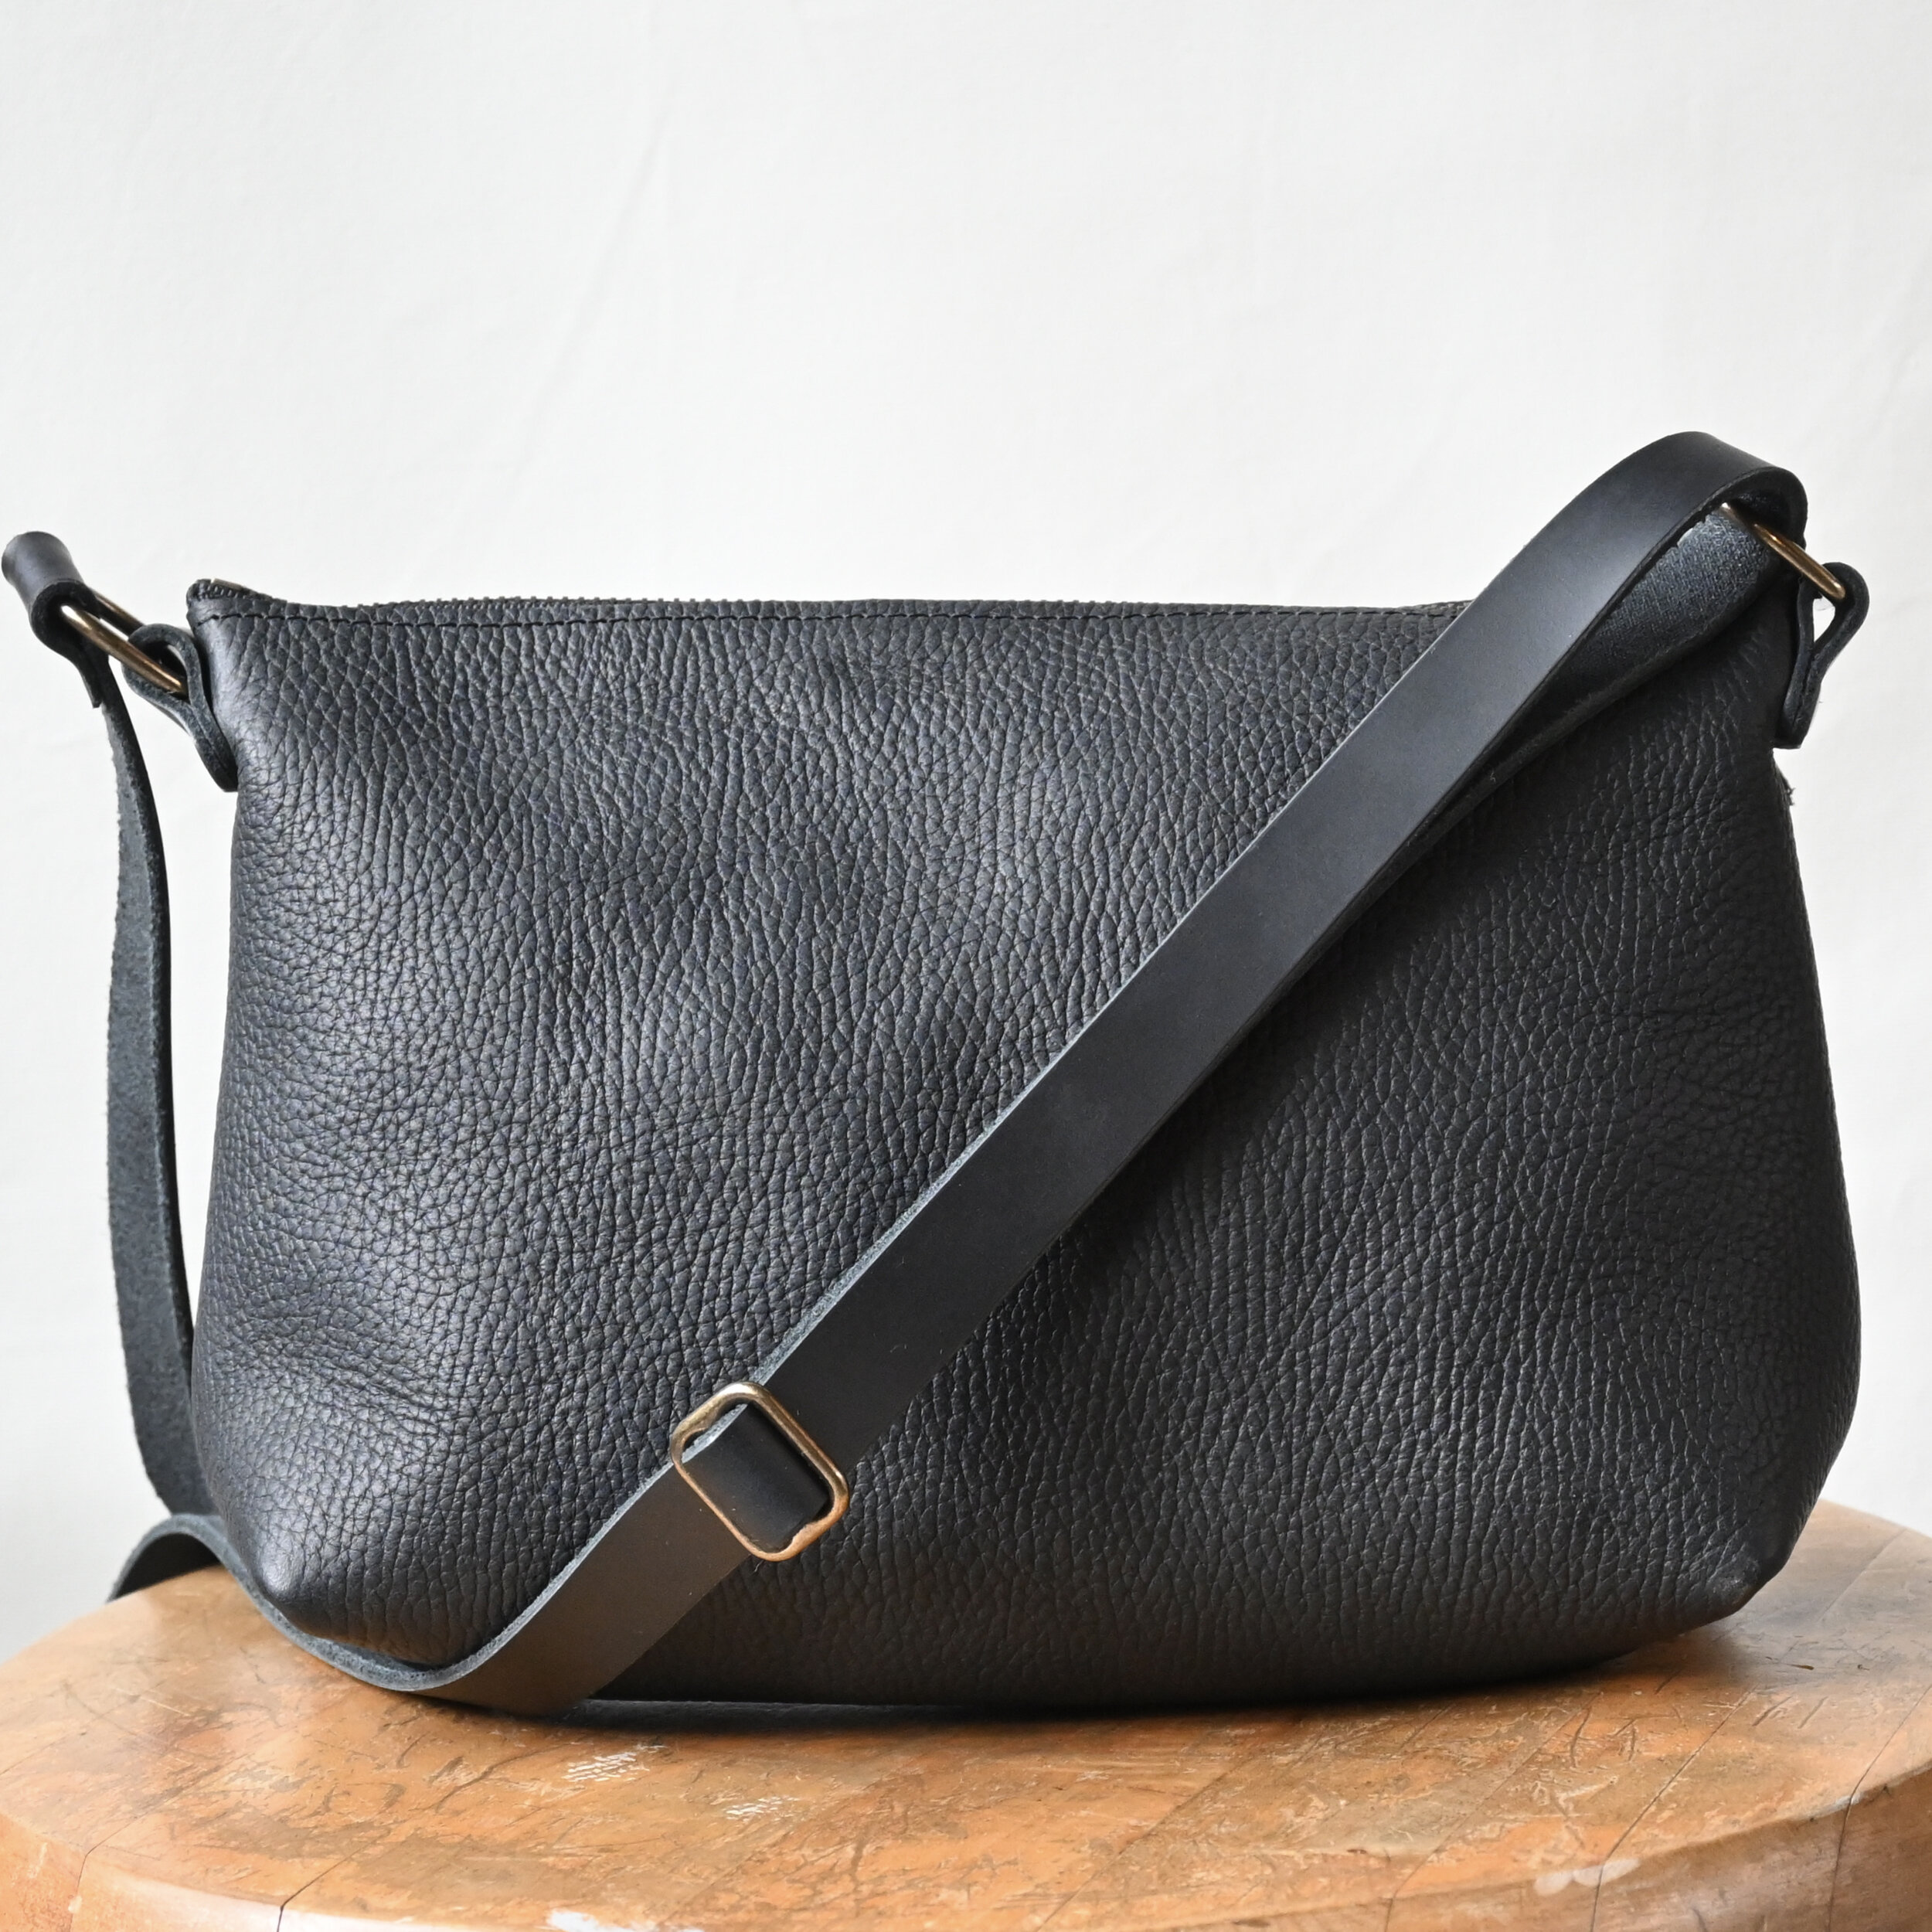 Curved Mini-Zip Bag | Made in USA | Eco Friendly Handmade Leather Purse | Small Leather Bag | Crossbody Bag | Clutch with Wrist Strap